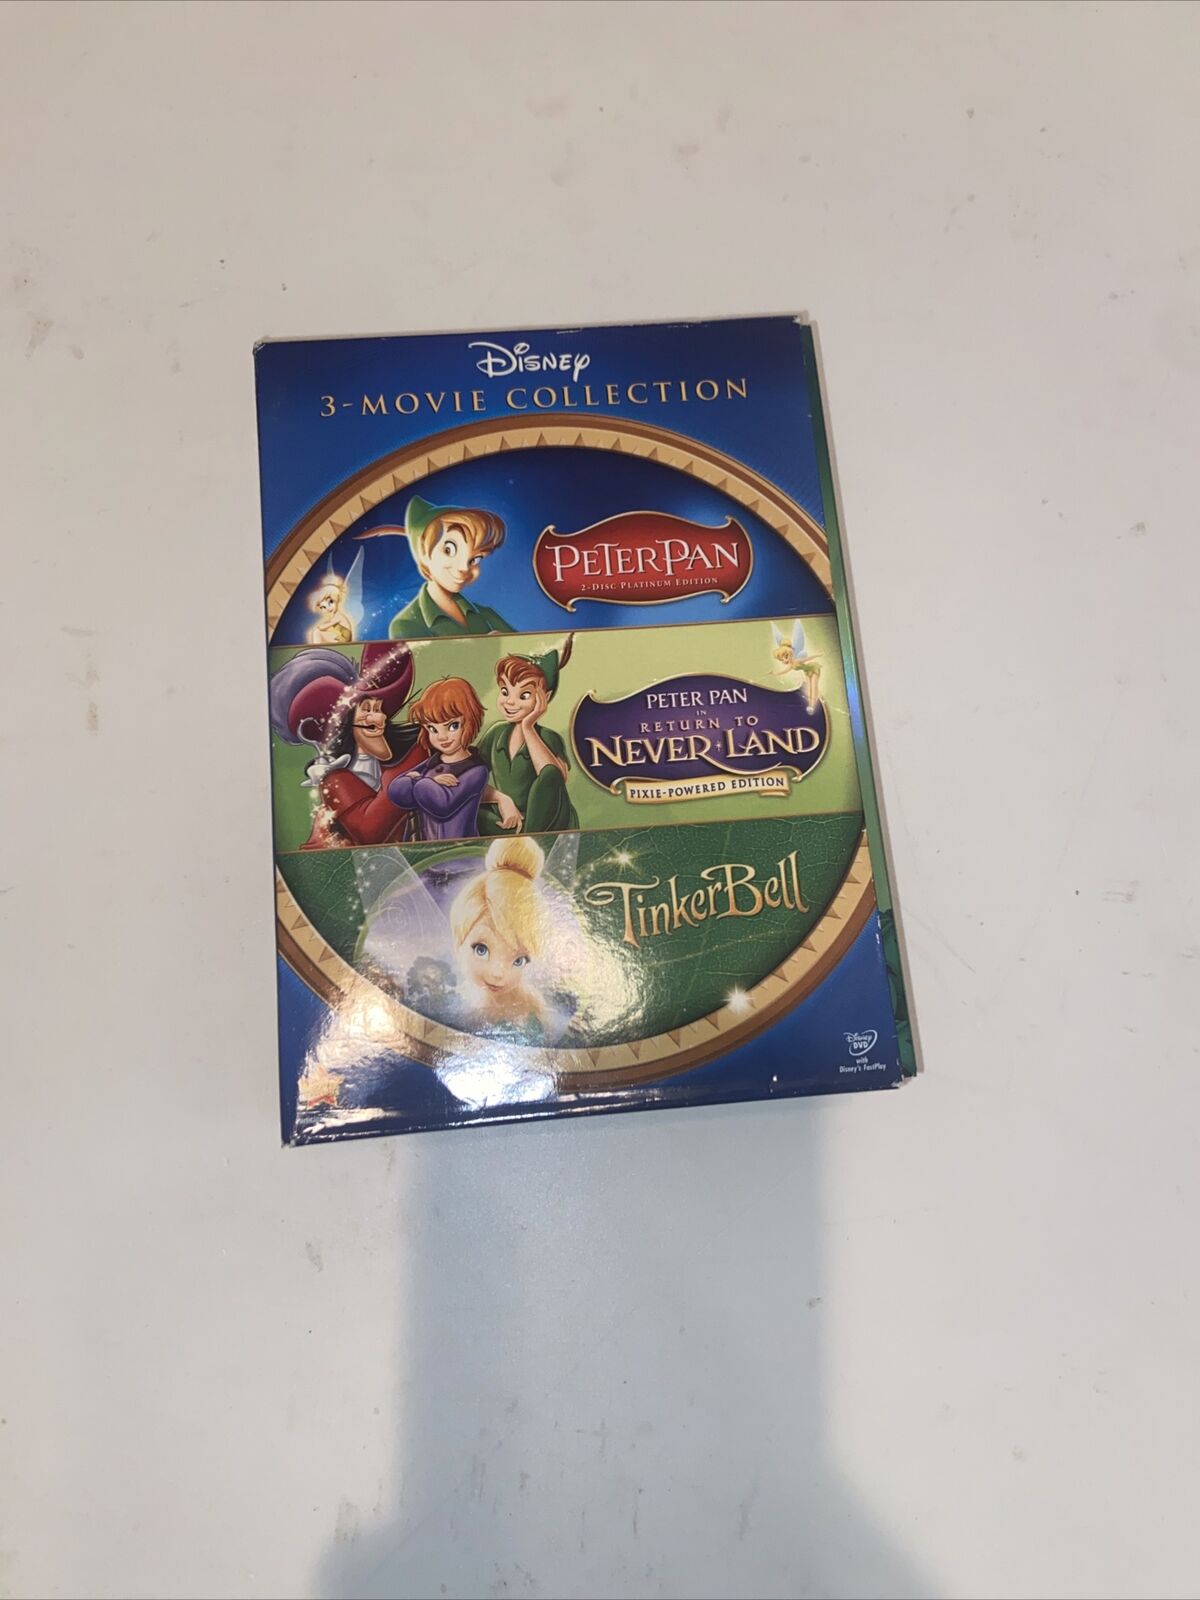 Disney A Movie Collection Peter Pan neverland tinkerbell